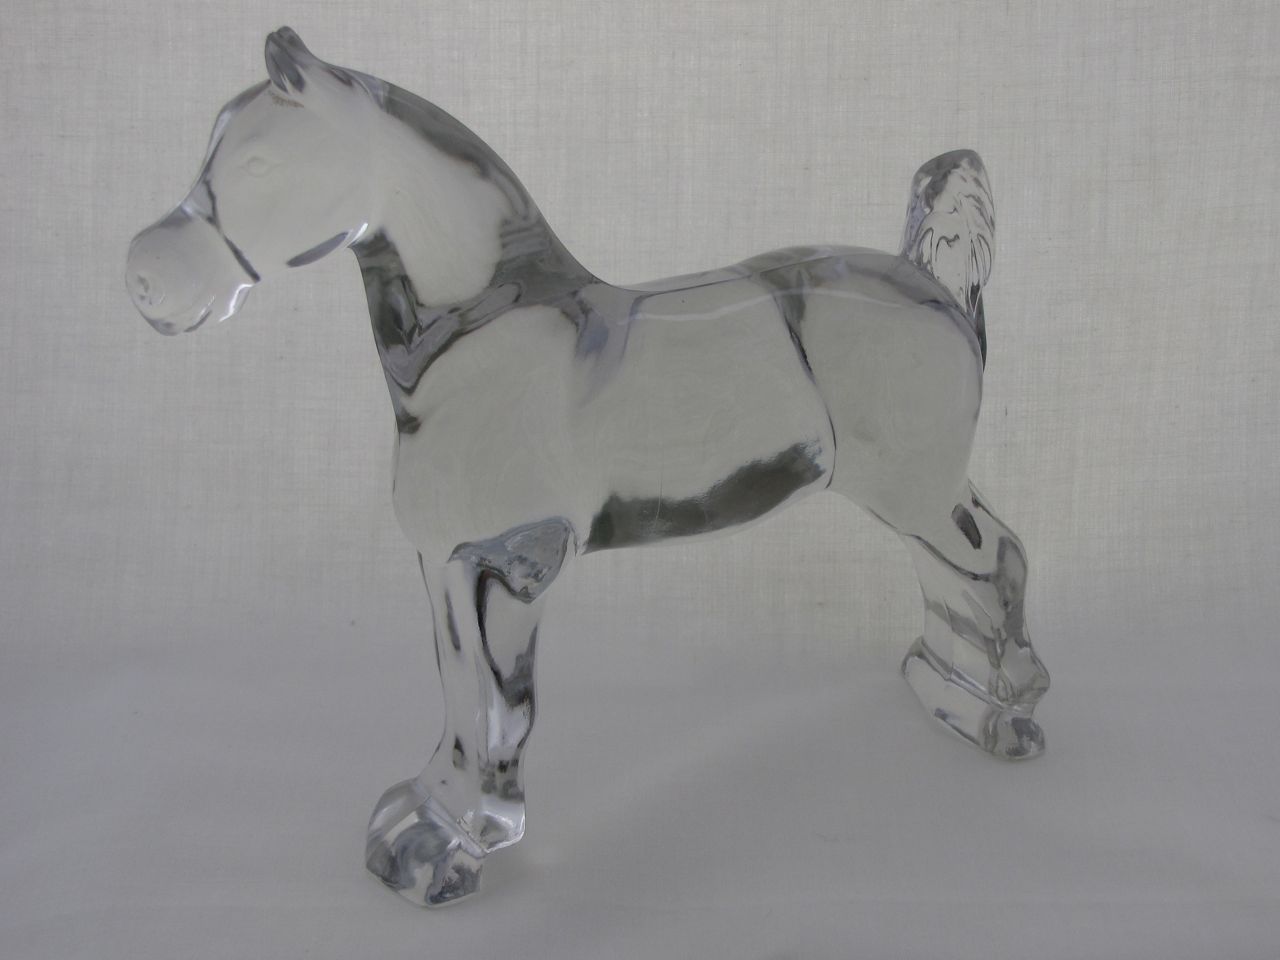 Heisey Show Horse No. 5 Crystal 1948-1949